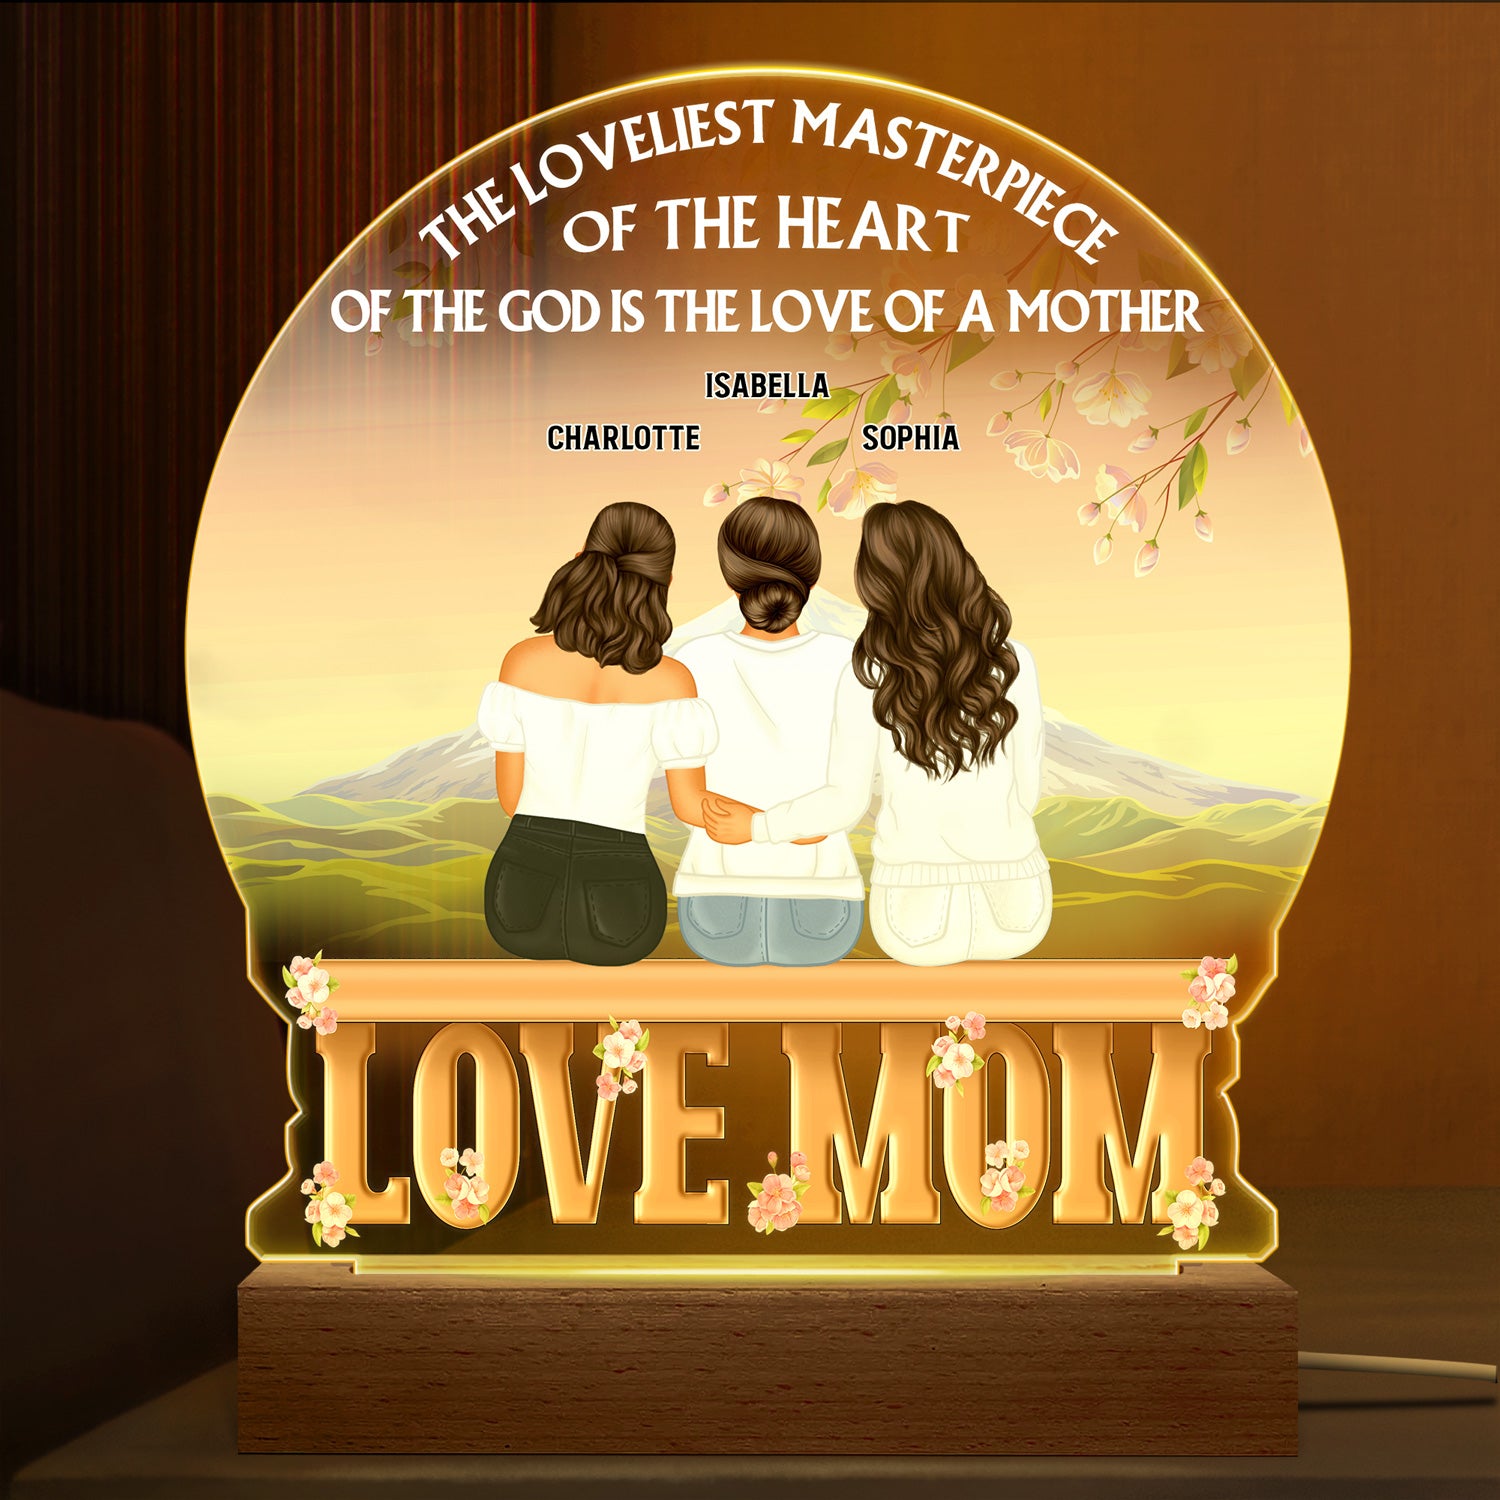 The Loveliest Masterpiece Of The Heart Of God Is The Love Of A Mother - Mother Gift - Personalized Custom 3D Led Light Wooden Base